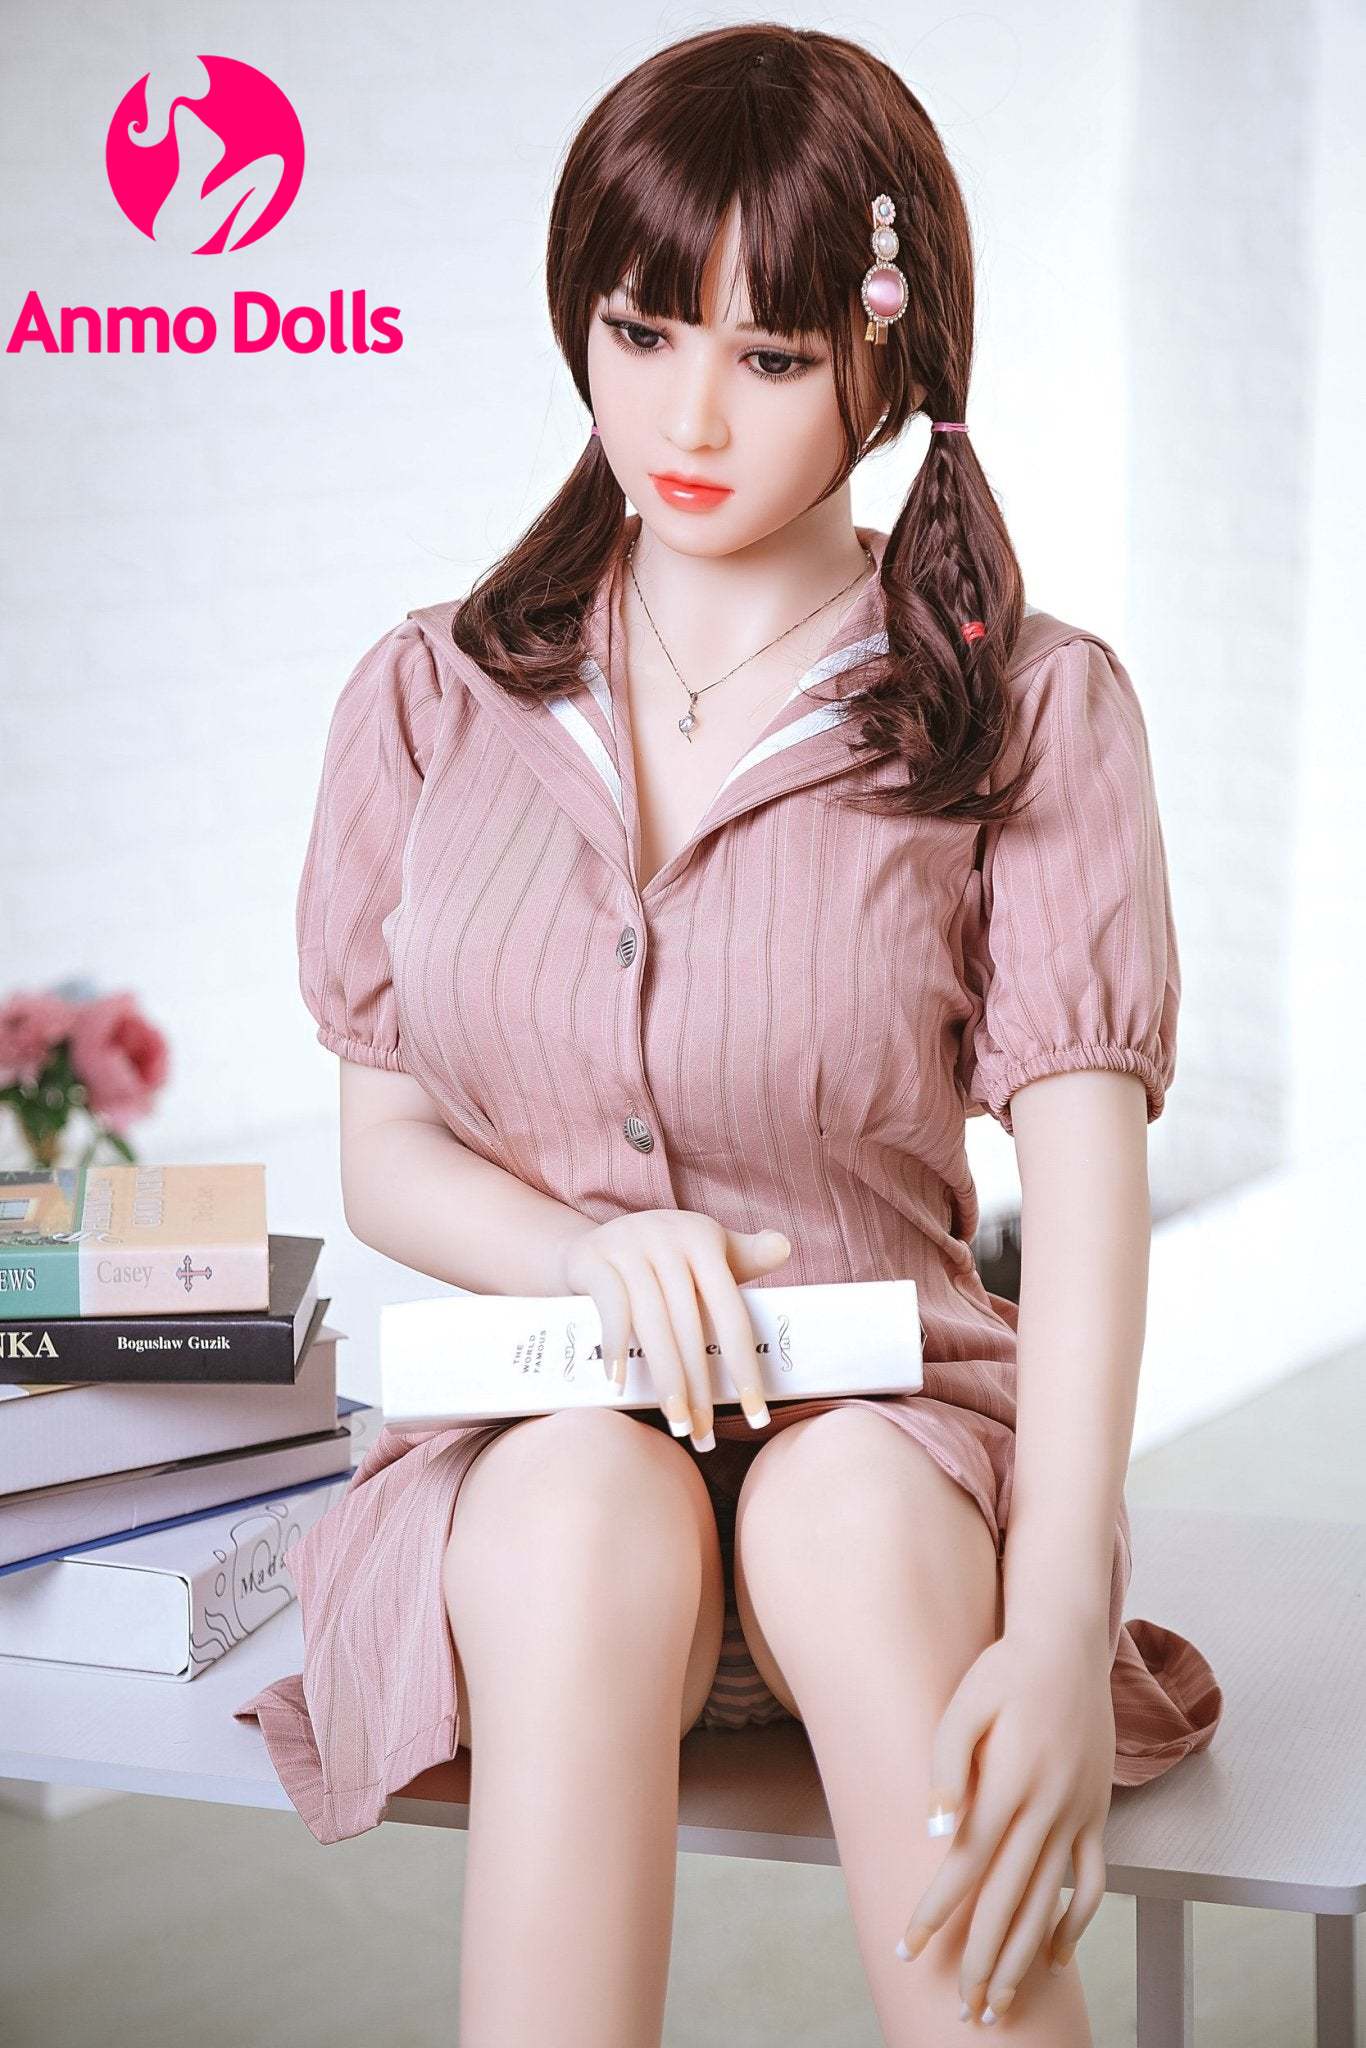 Jacqueline - Atrractive Student  Sex Doll With a Silicone face -TPE Sex Doll by Anmodolls